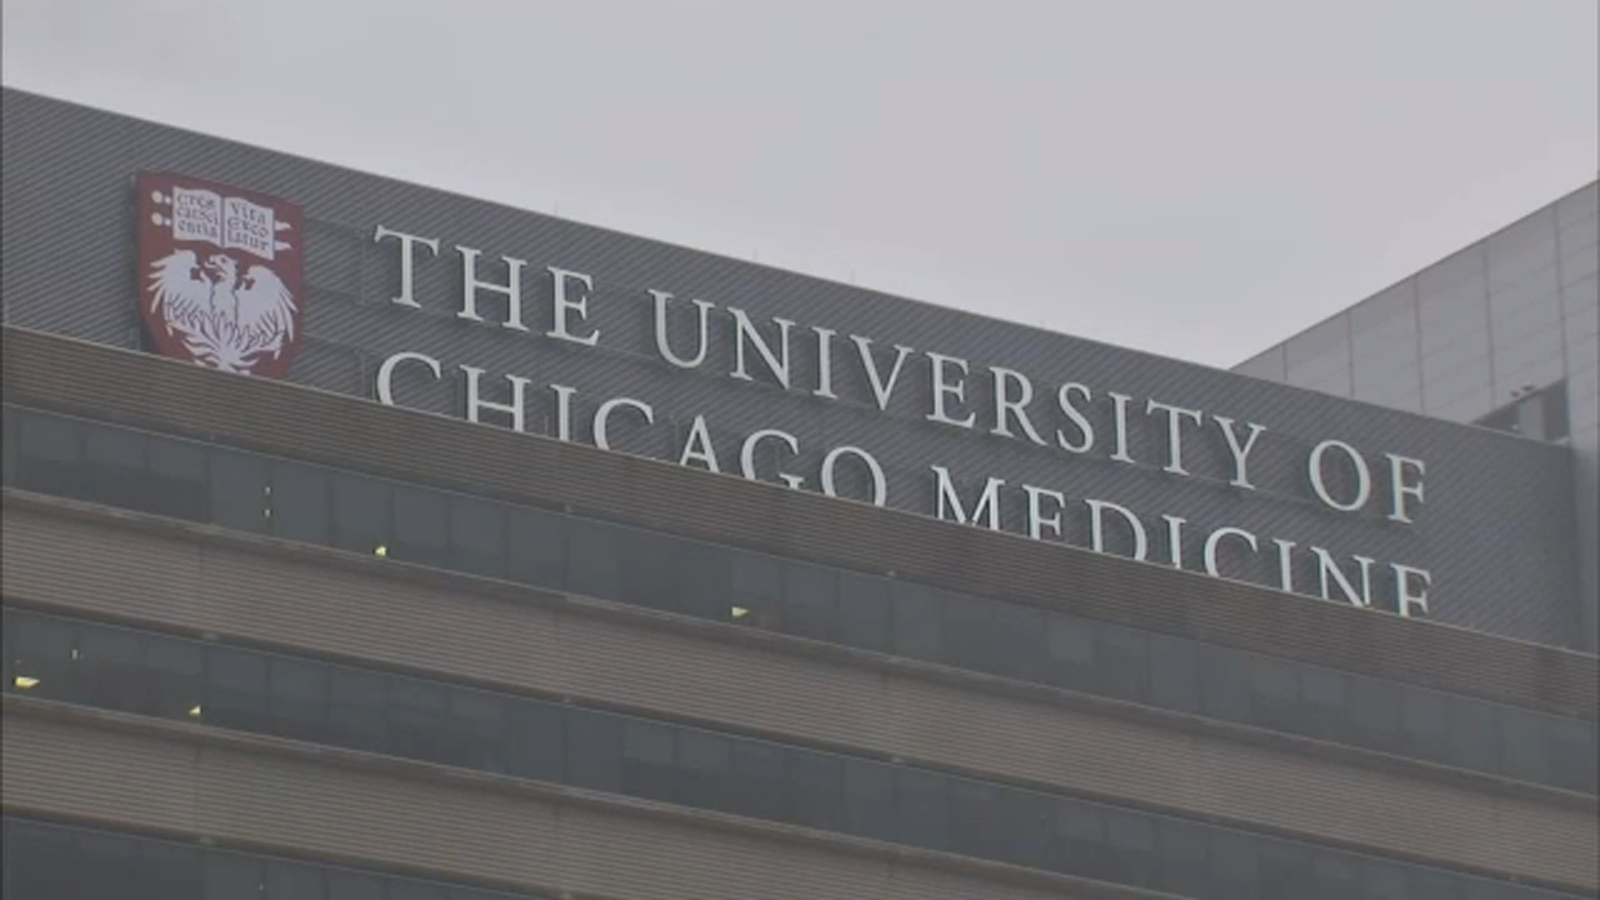 University of Chicago Medical Center reports data breach impacting employees and patients